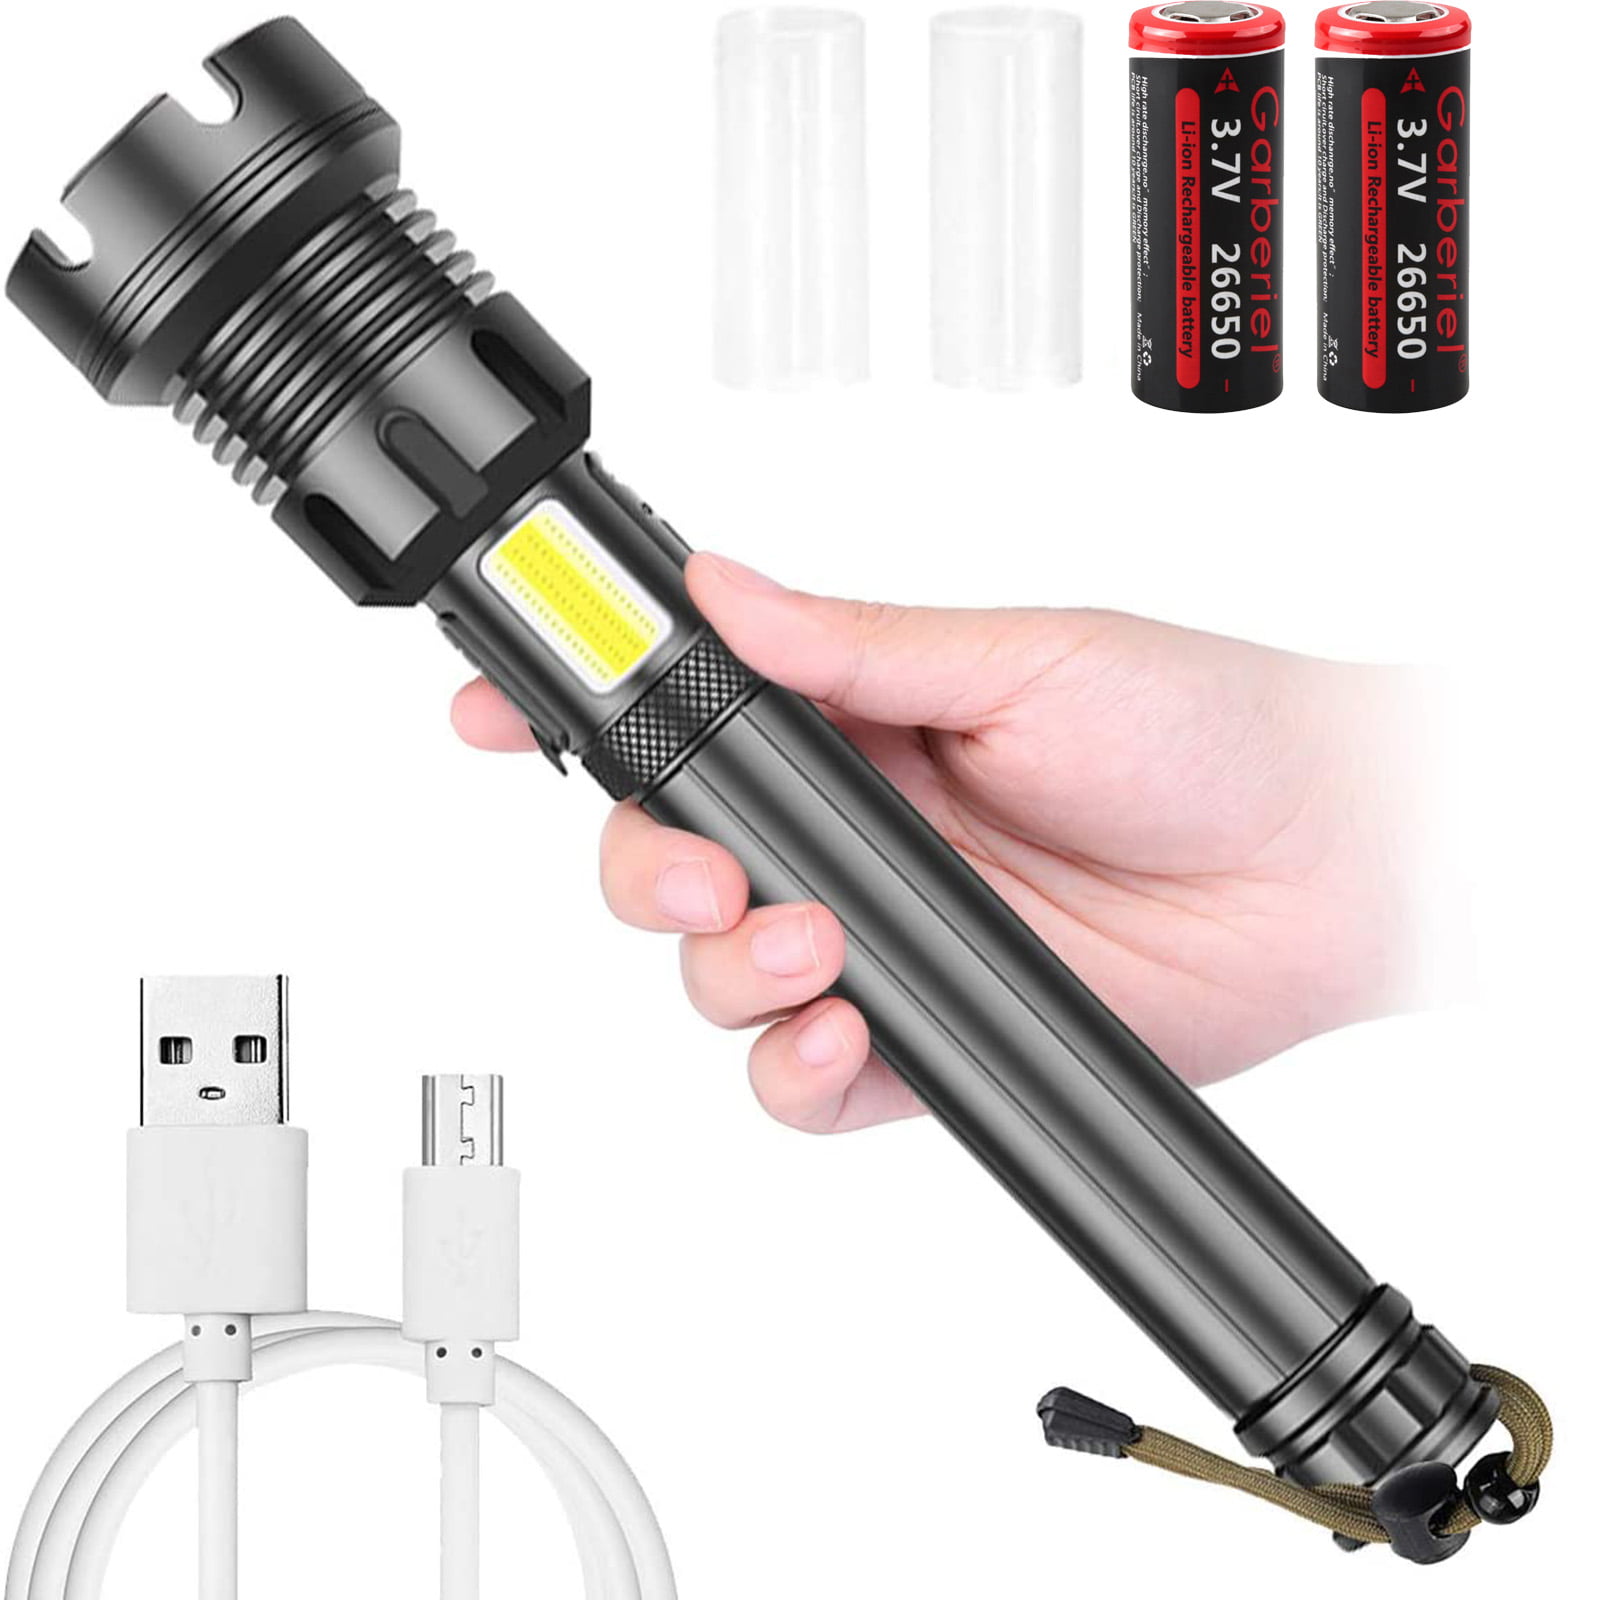 Tactical 7W 1200lm CREE Q5 LED SA3 Zoomable Mini Flashlight Torch Lamp 